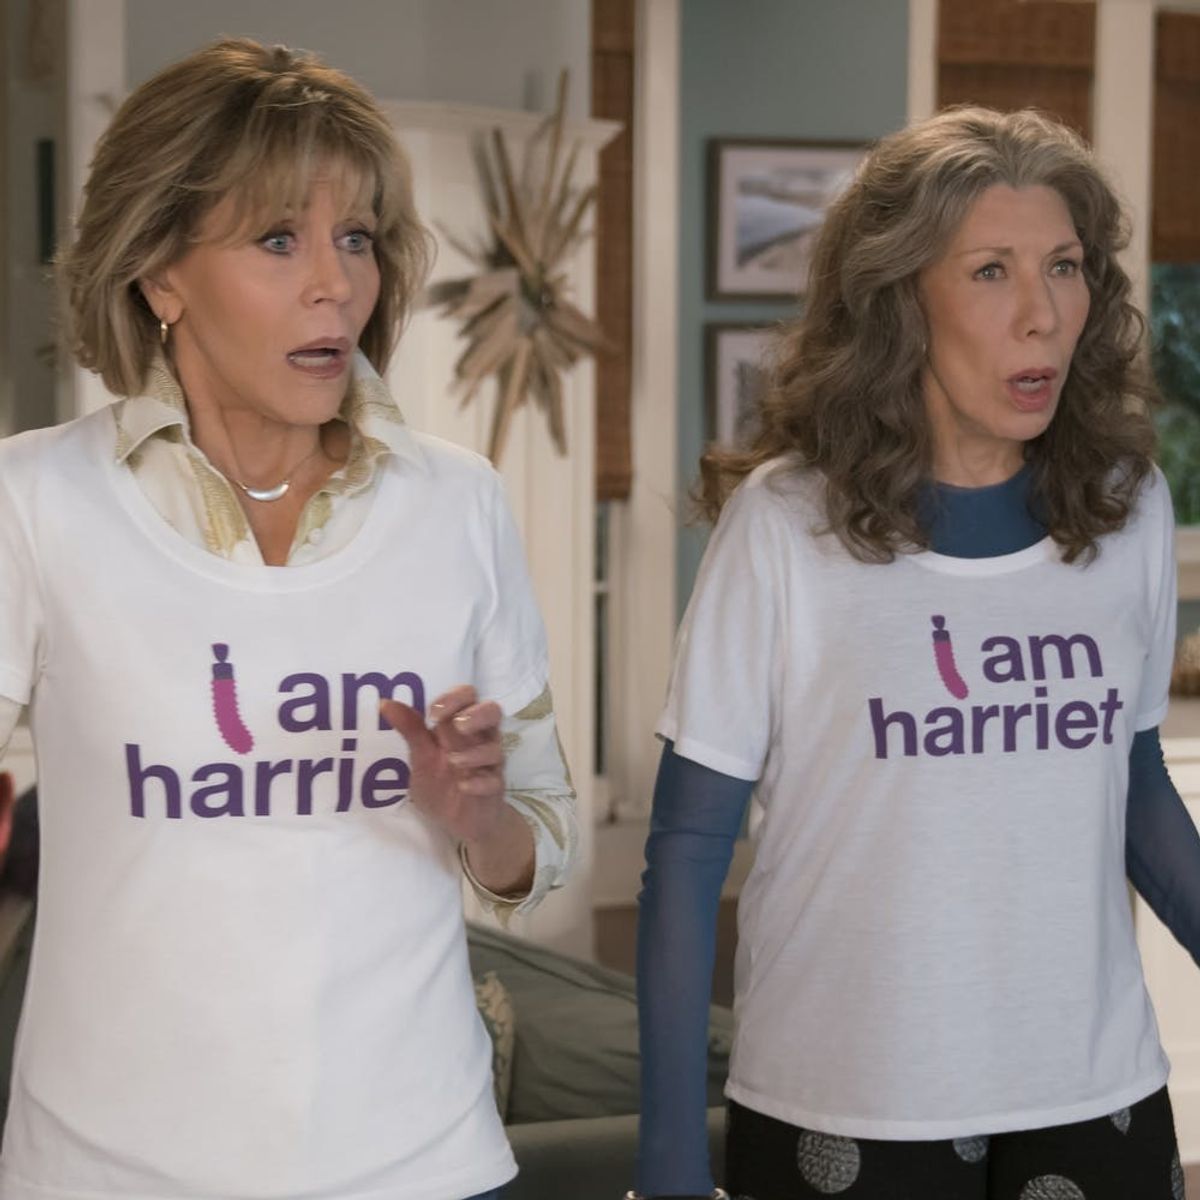 Grace and Frankie’s Season 4 Trailer Gives Us a Baby, an Open Relationship, and Lisa Kudrow!